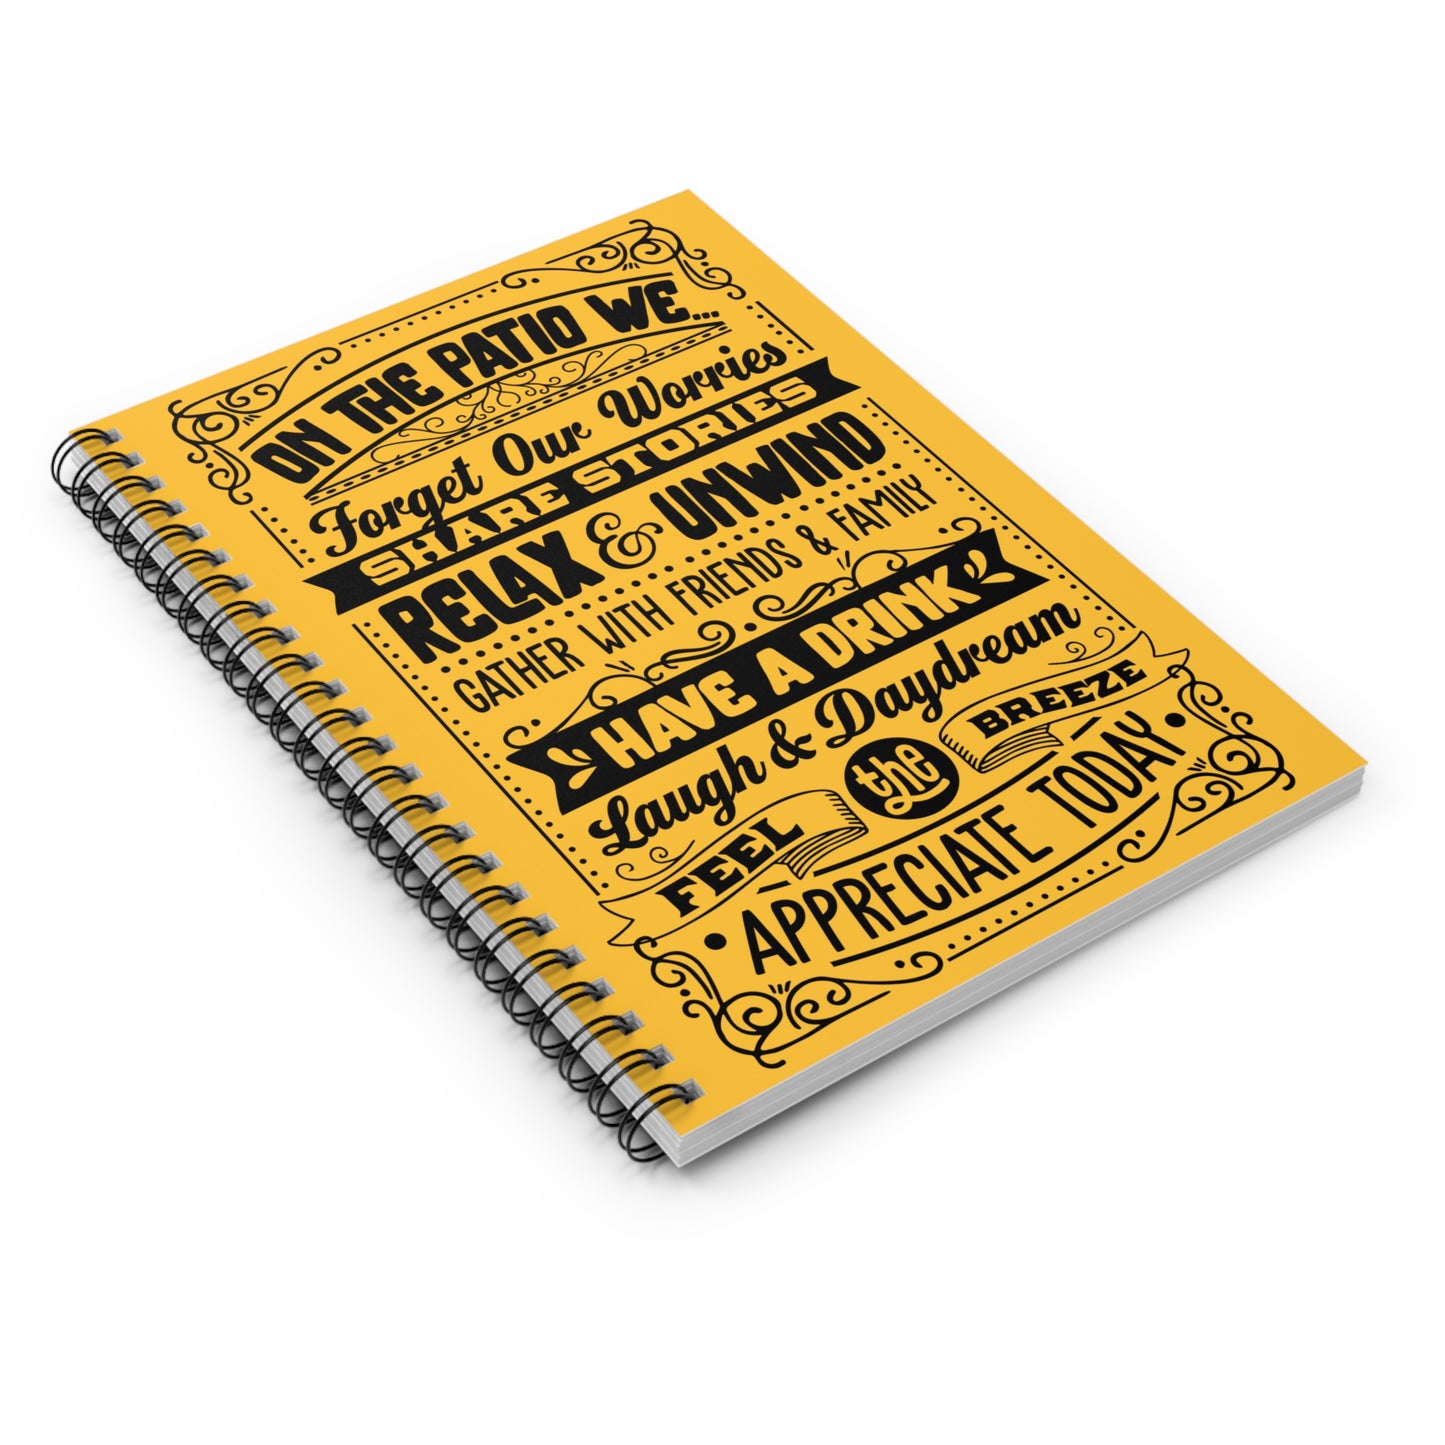 Patio Rules: Spiral Notebook - Log Books - Journals - Diaries - and More Custom Printed by TheGlassyLass.com